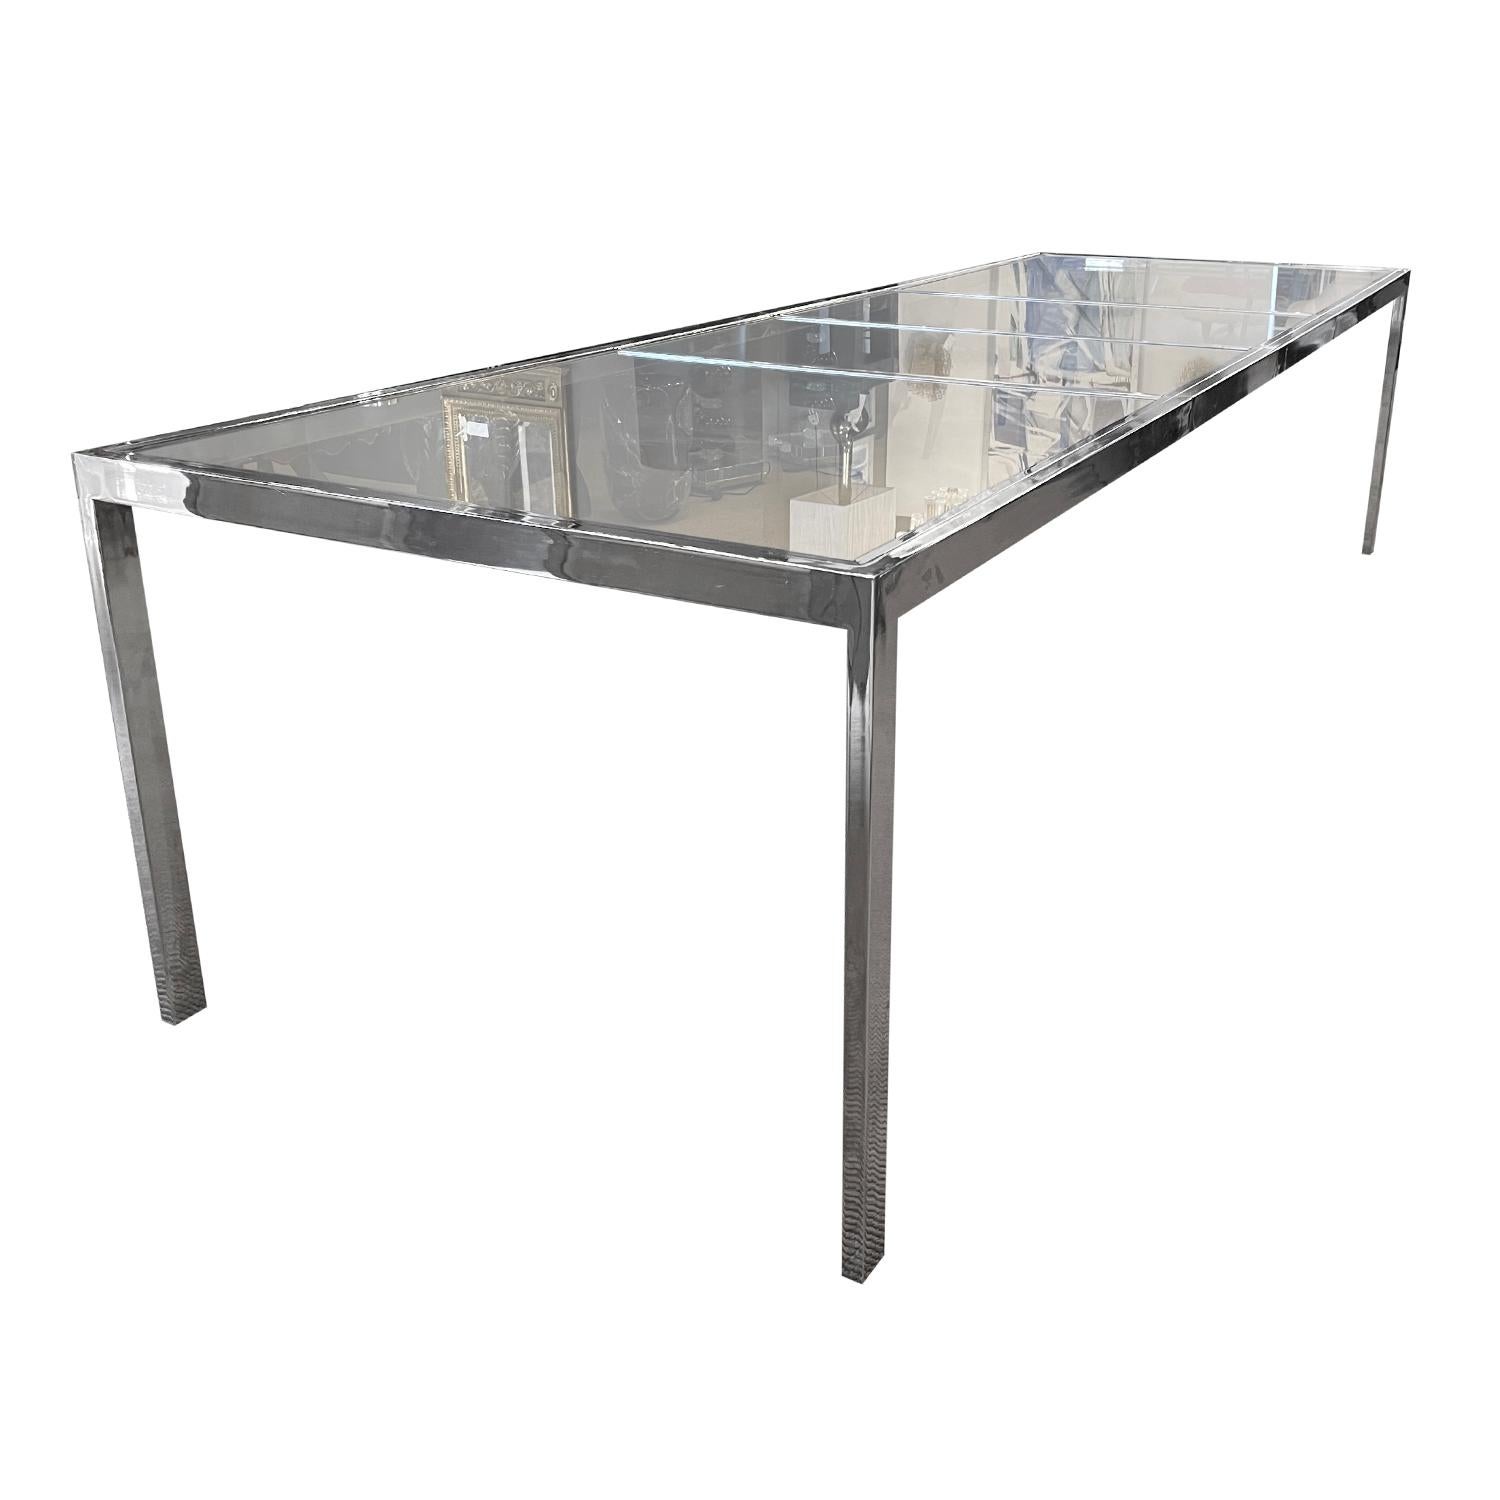 Hand-Crafted 20th Century American Chrome Glass Extendable Dining Table by Milo Baughman